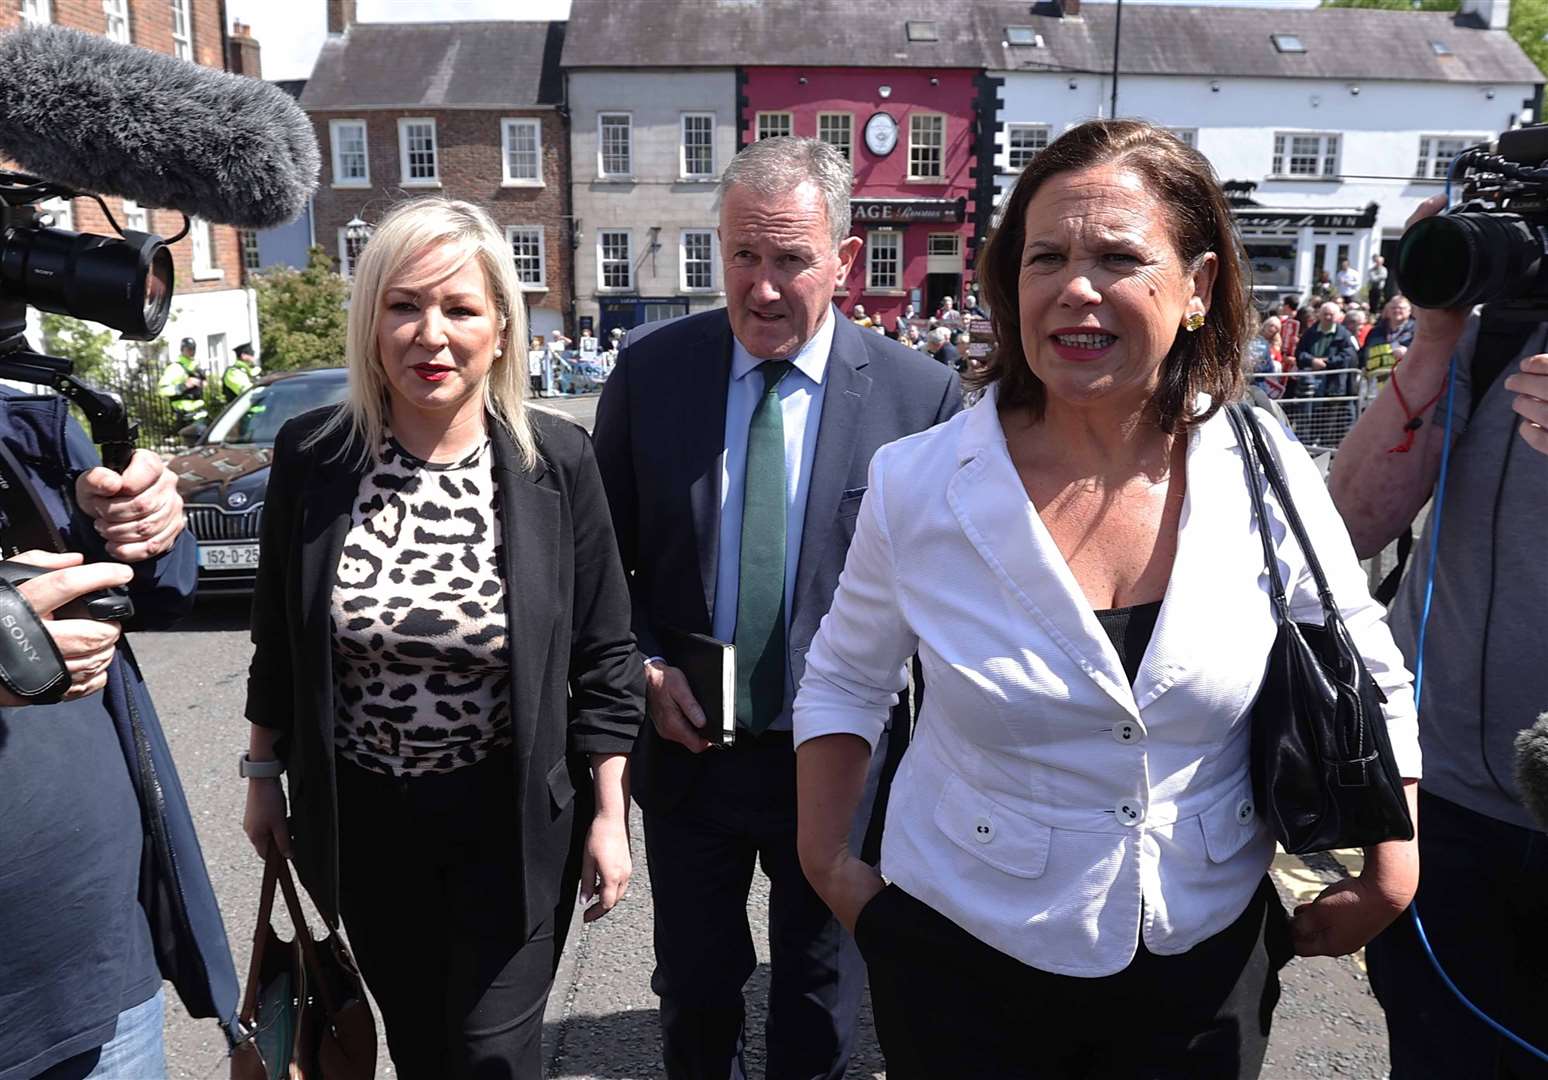 Michelle O’Neill, Conor Murphy and Mary Lou McDonald arrive at Hillsborough Castle (Liam McBurney/PA)